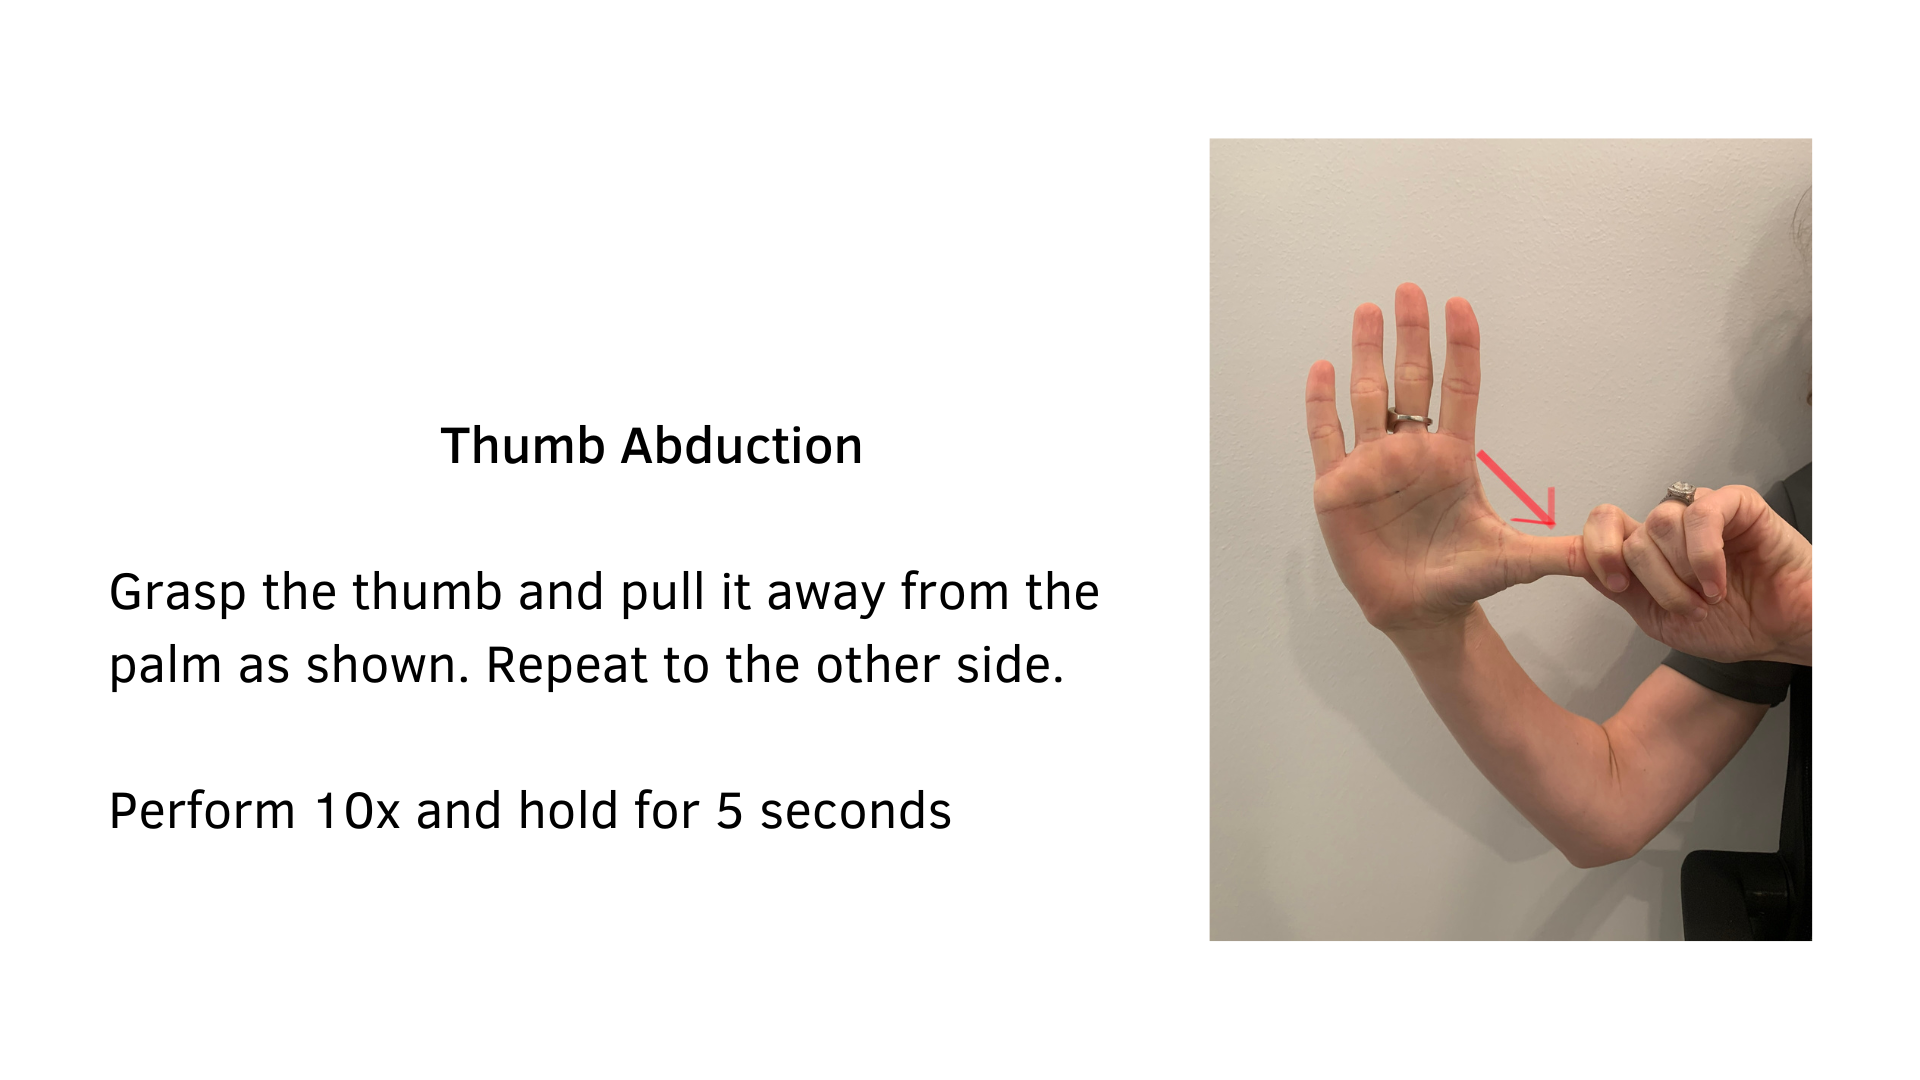 Black text on a white background that reads, "Thumb Abduction: Grasp the thumb and pull it away from the palm as shown. Repeat to the other side. Perform 10x and hold for 5 seconds". A picture of a person demonstrating the stretch is featured; they are holding up their right hand and using their left hand to gently pull their thumb downward. An arrow is included to illustrate the downward motion.